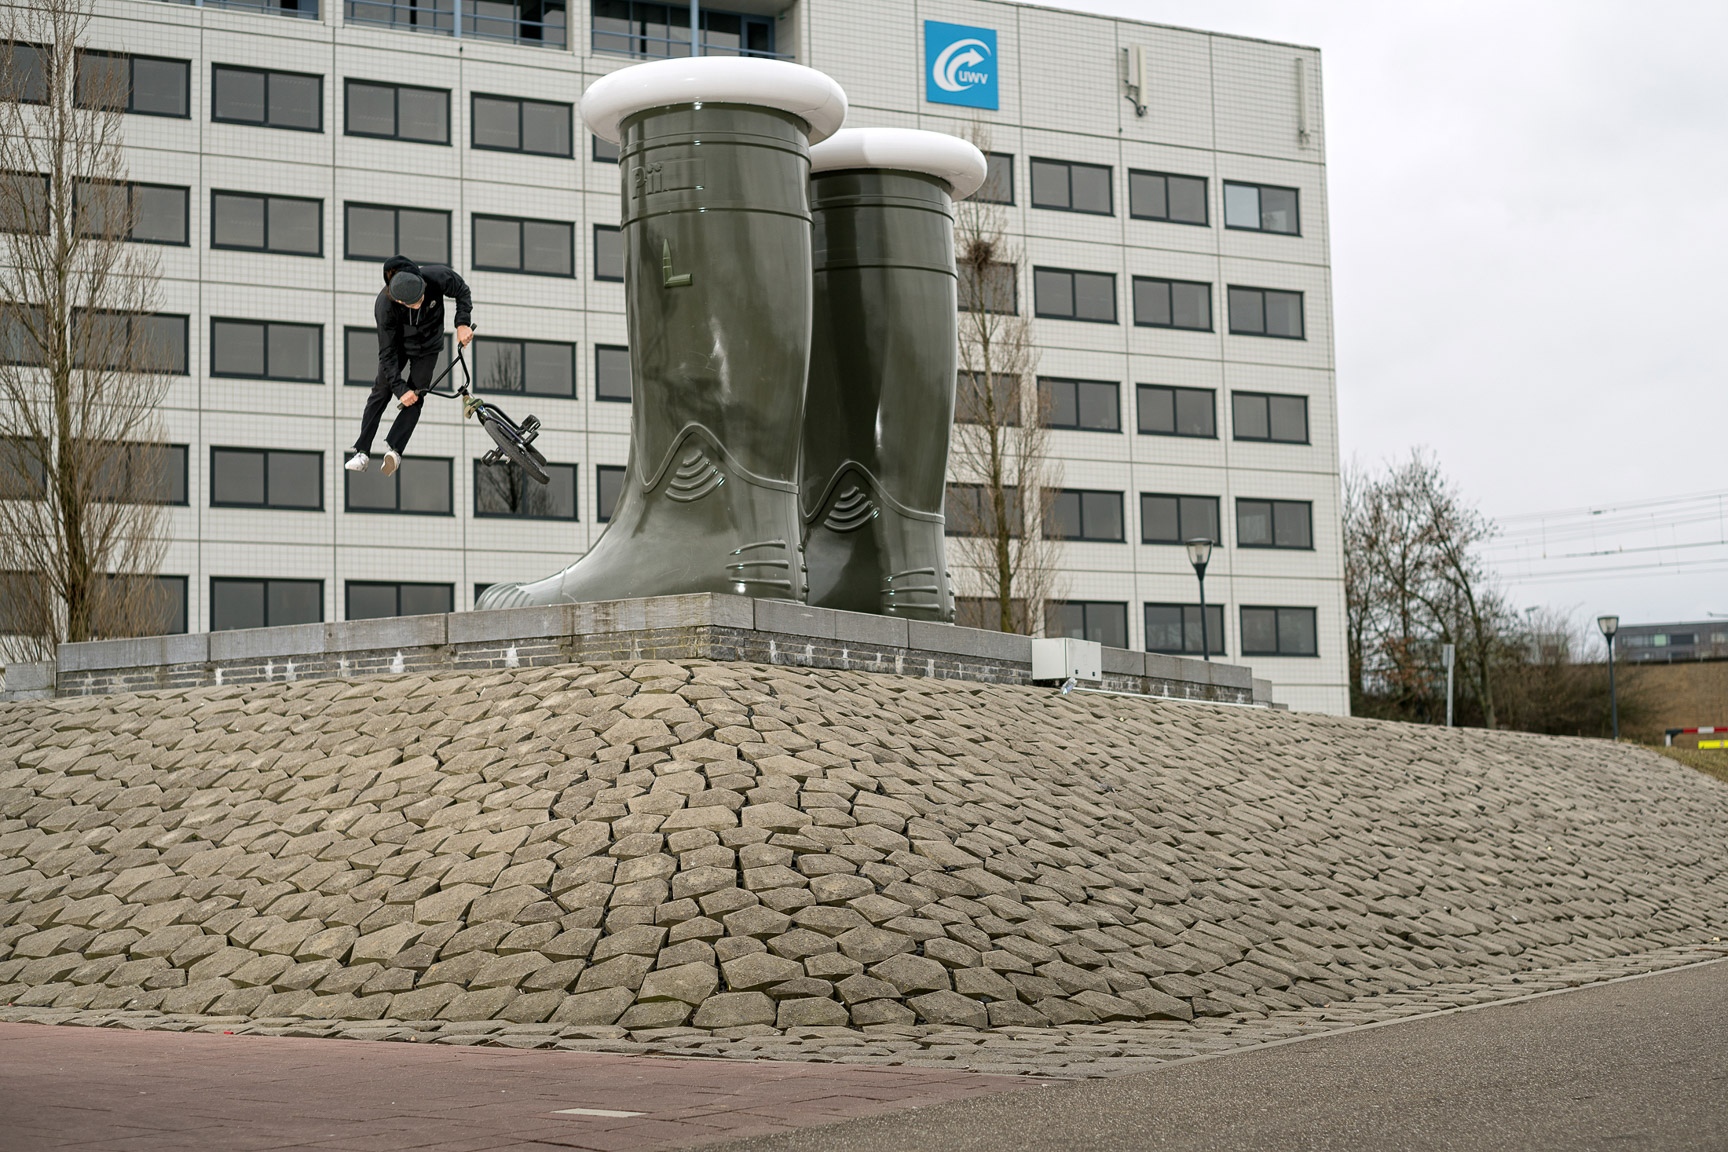 Argentinian Iki Mazza downside tailwhips into a rough bank at the first spot of the day while getting the boot in Venlo, the Netherlands. This was shot back in March this year during a trip he made through Europe. -- Aaron Zwaal